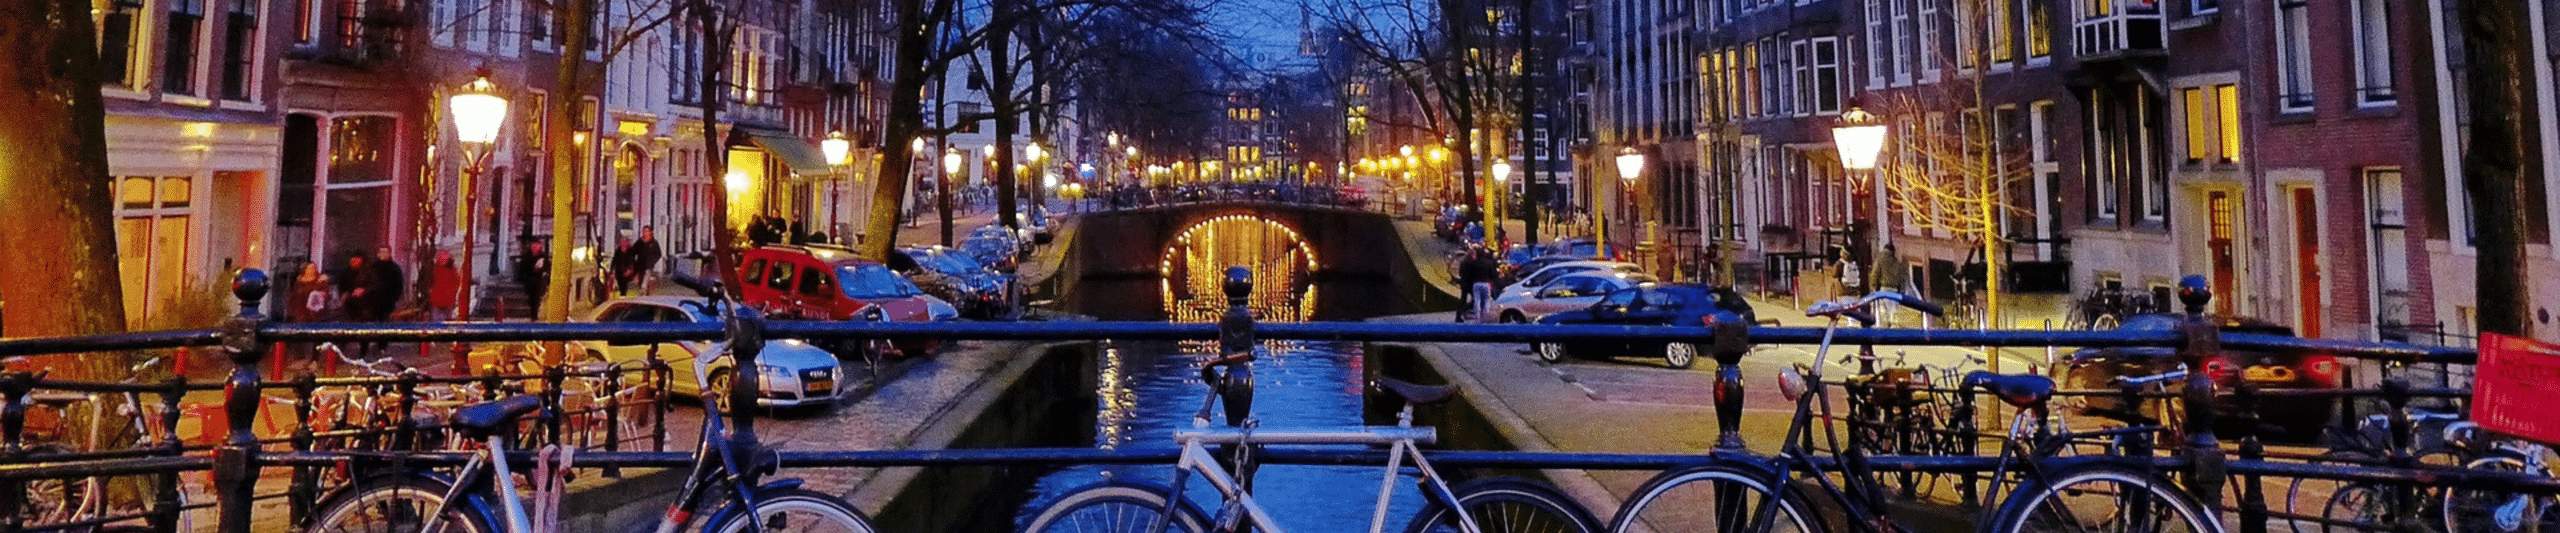 Rent a bike in Amsterdam at A-Bike rental & tours - what to do in December in Amsterdam?